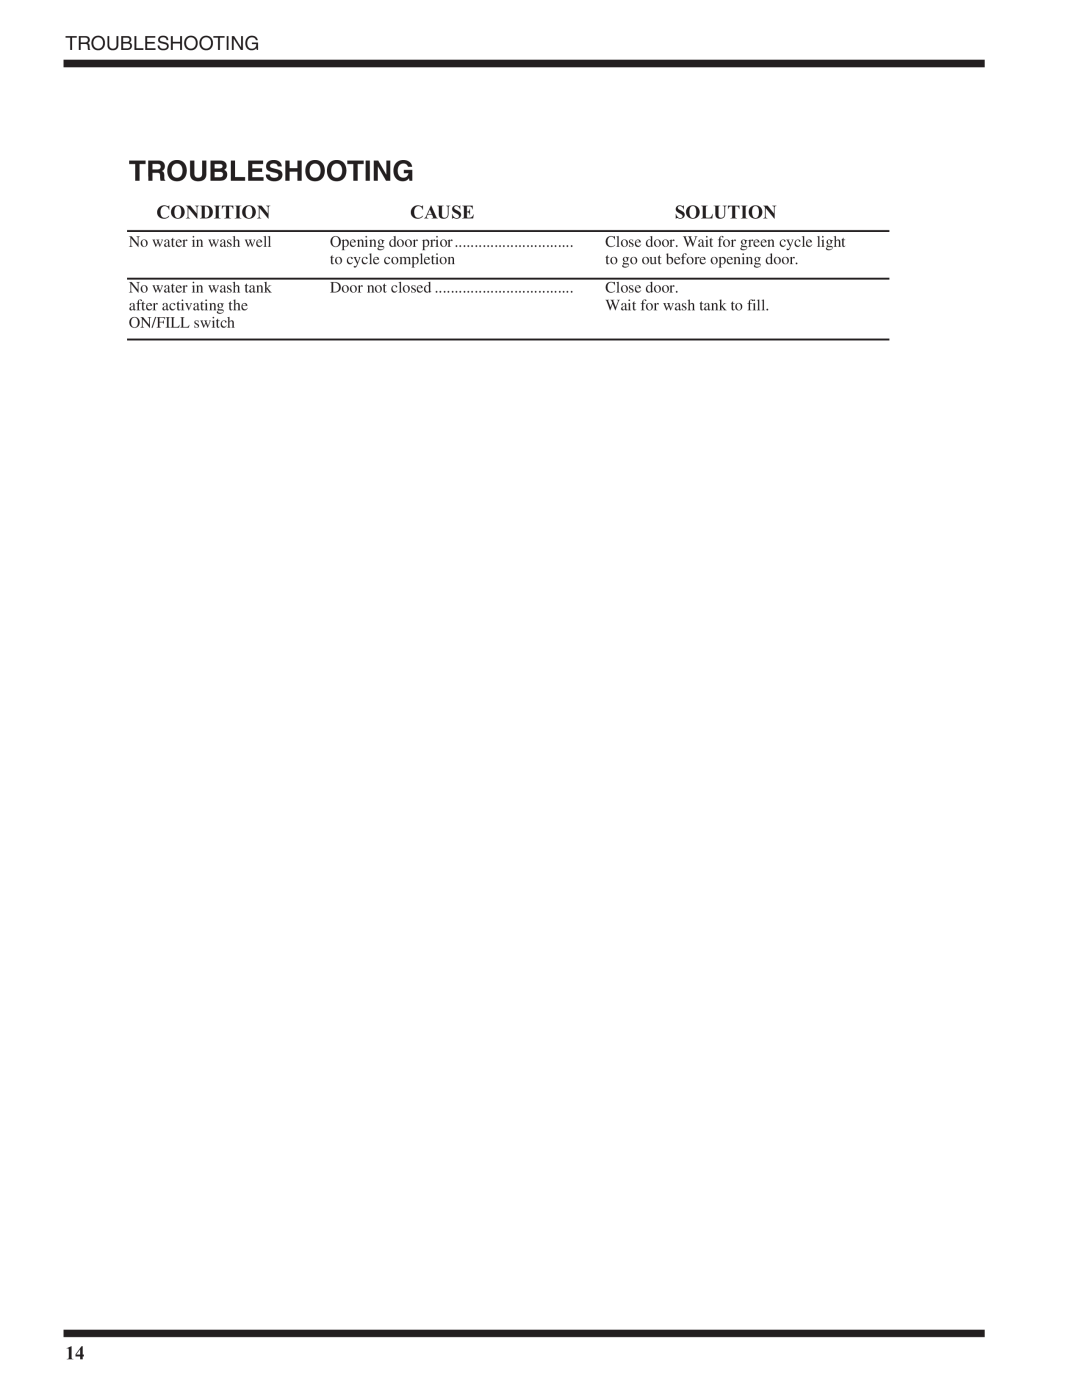 Moyer Diebel MD18-1, MD18-2 technical manual Troubleshooting, Condition, Cause, Solution 